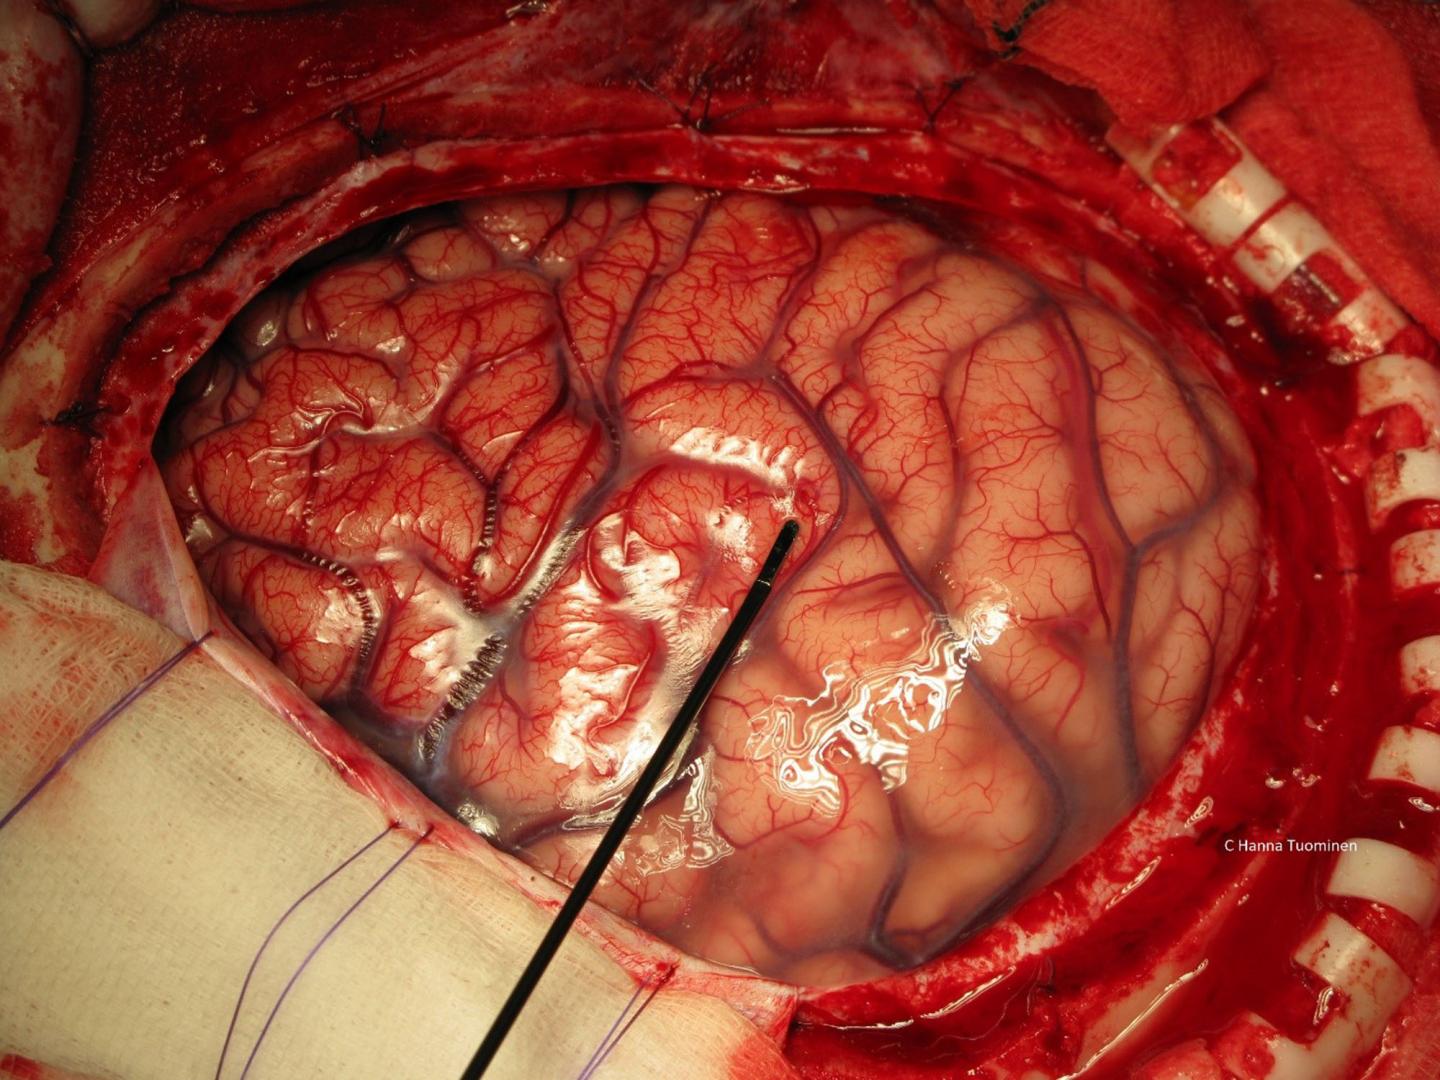 The Surface of the Brain, Pictured During Surgery